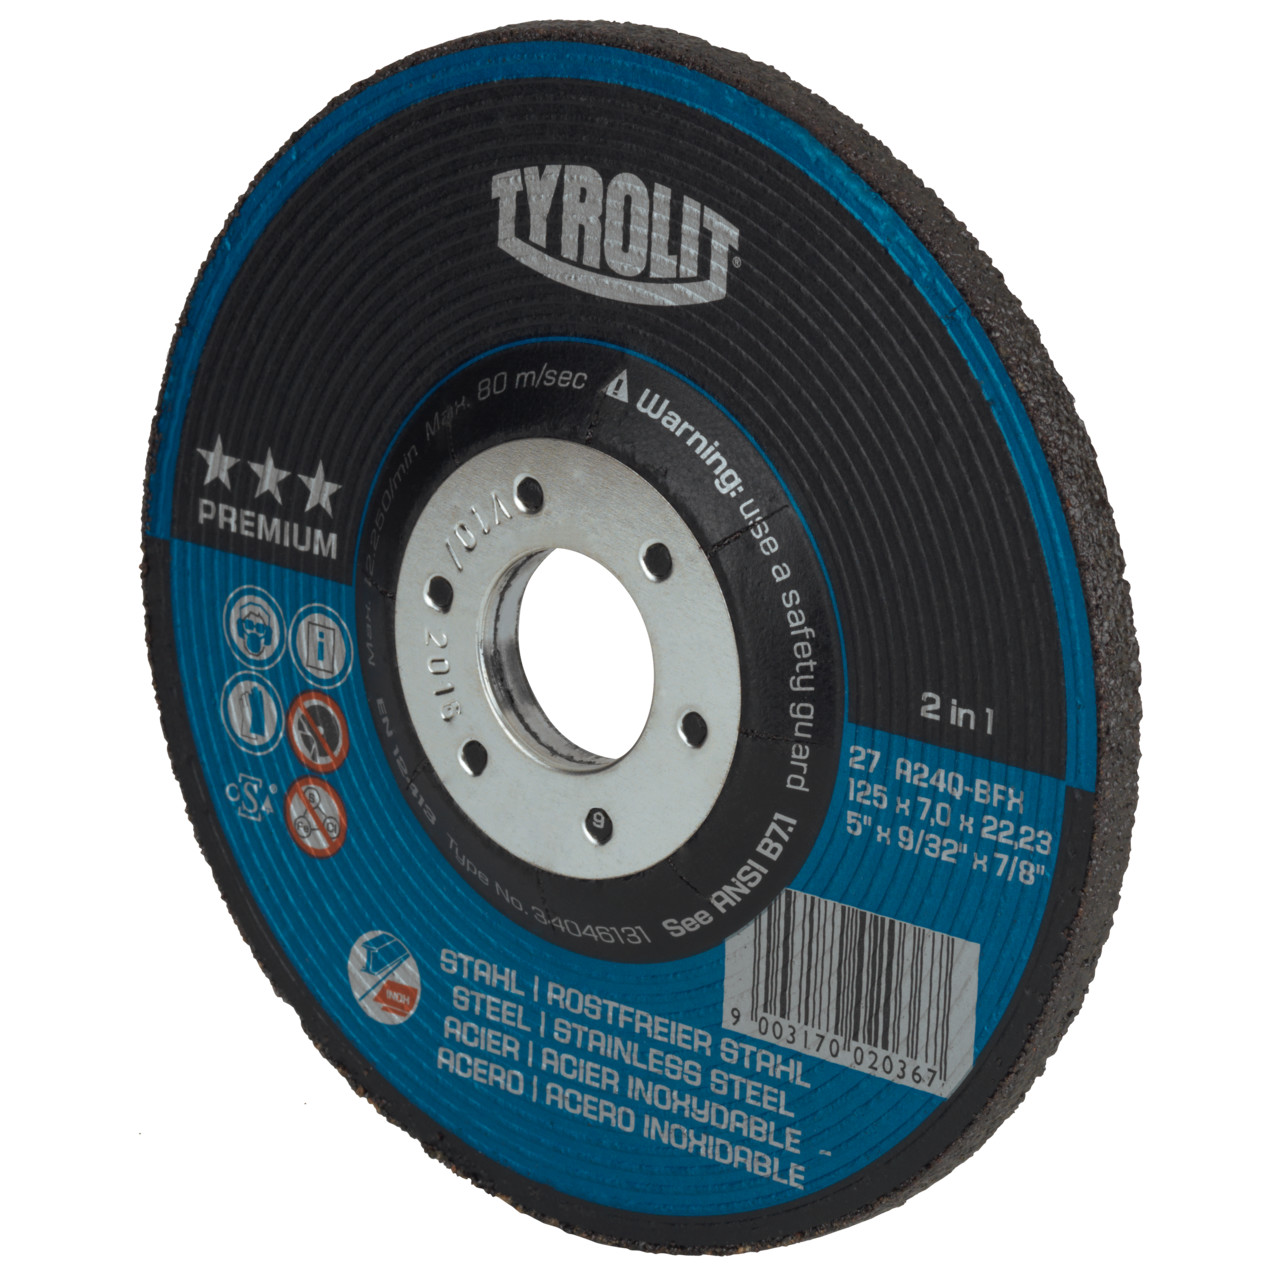 Tyrolit Rough grinding disc DxUxH 125x7x22.23 2in1 for steel and stainless steel, shape: 27 - offset version, Art. 34046131